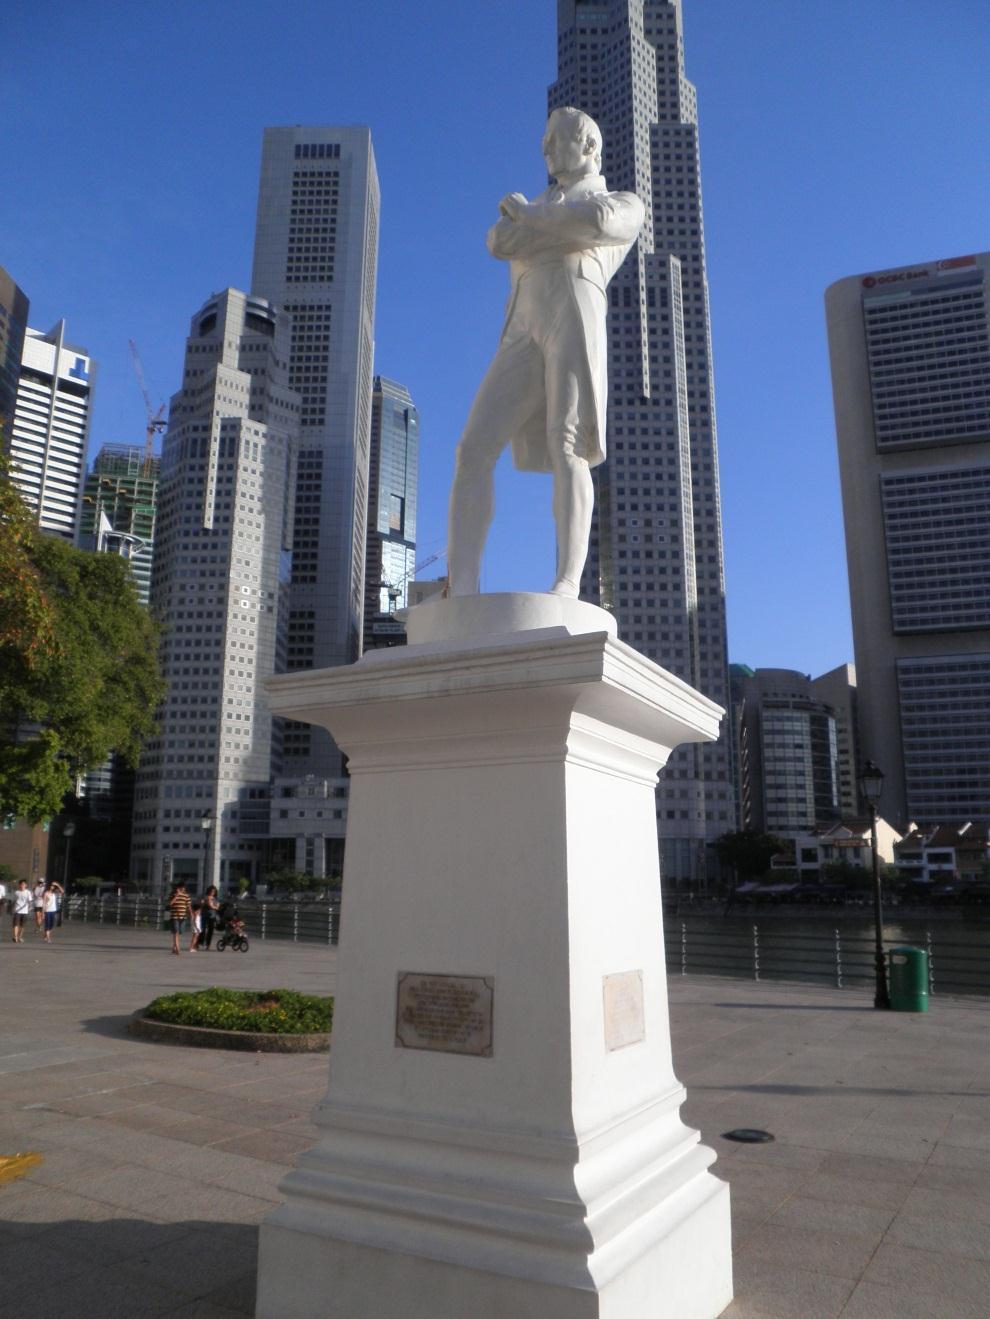 Colonial History Sir Stamford Raffles established a British trading post in 1819 British gained complete power of the island by 1824 In 1959 Singaporeans